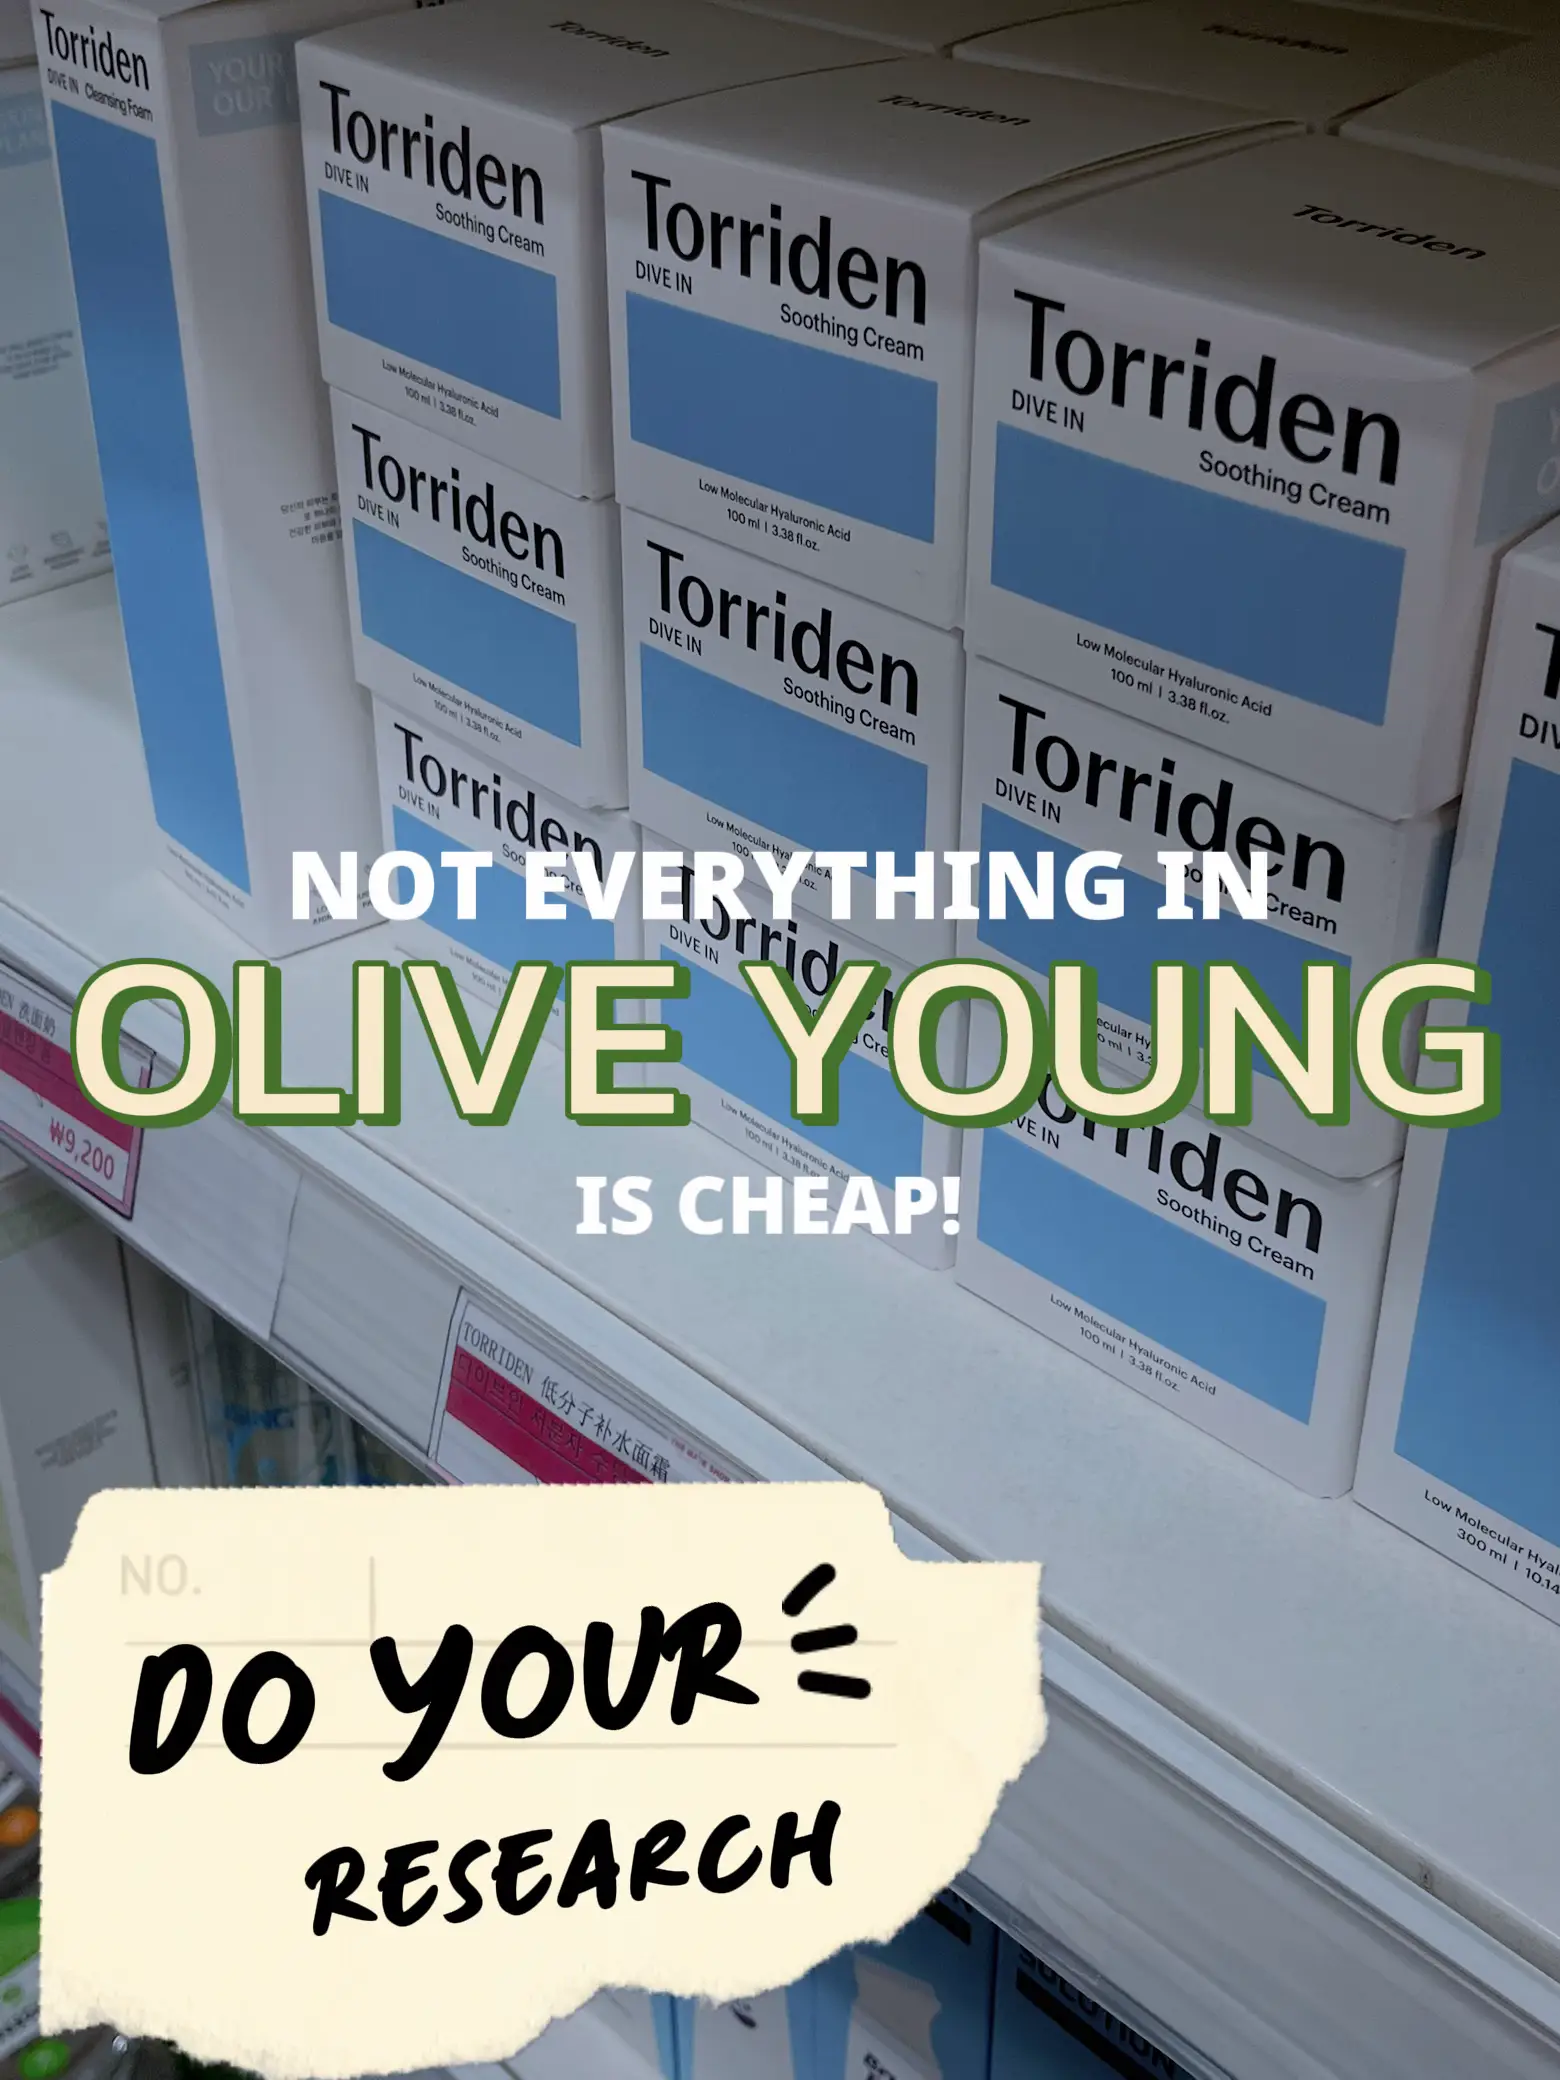 OLIVE YOUNG IS NOT THE CHEAPEST's images(0)